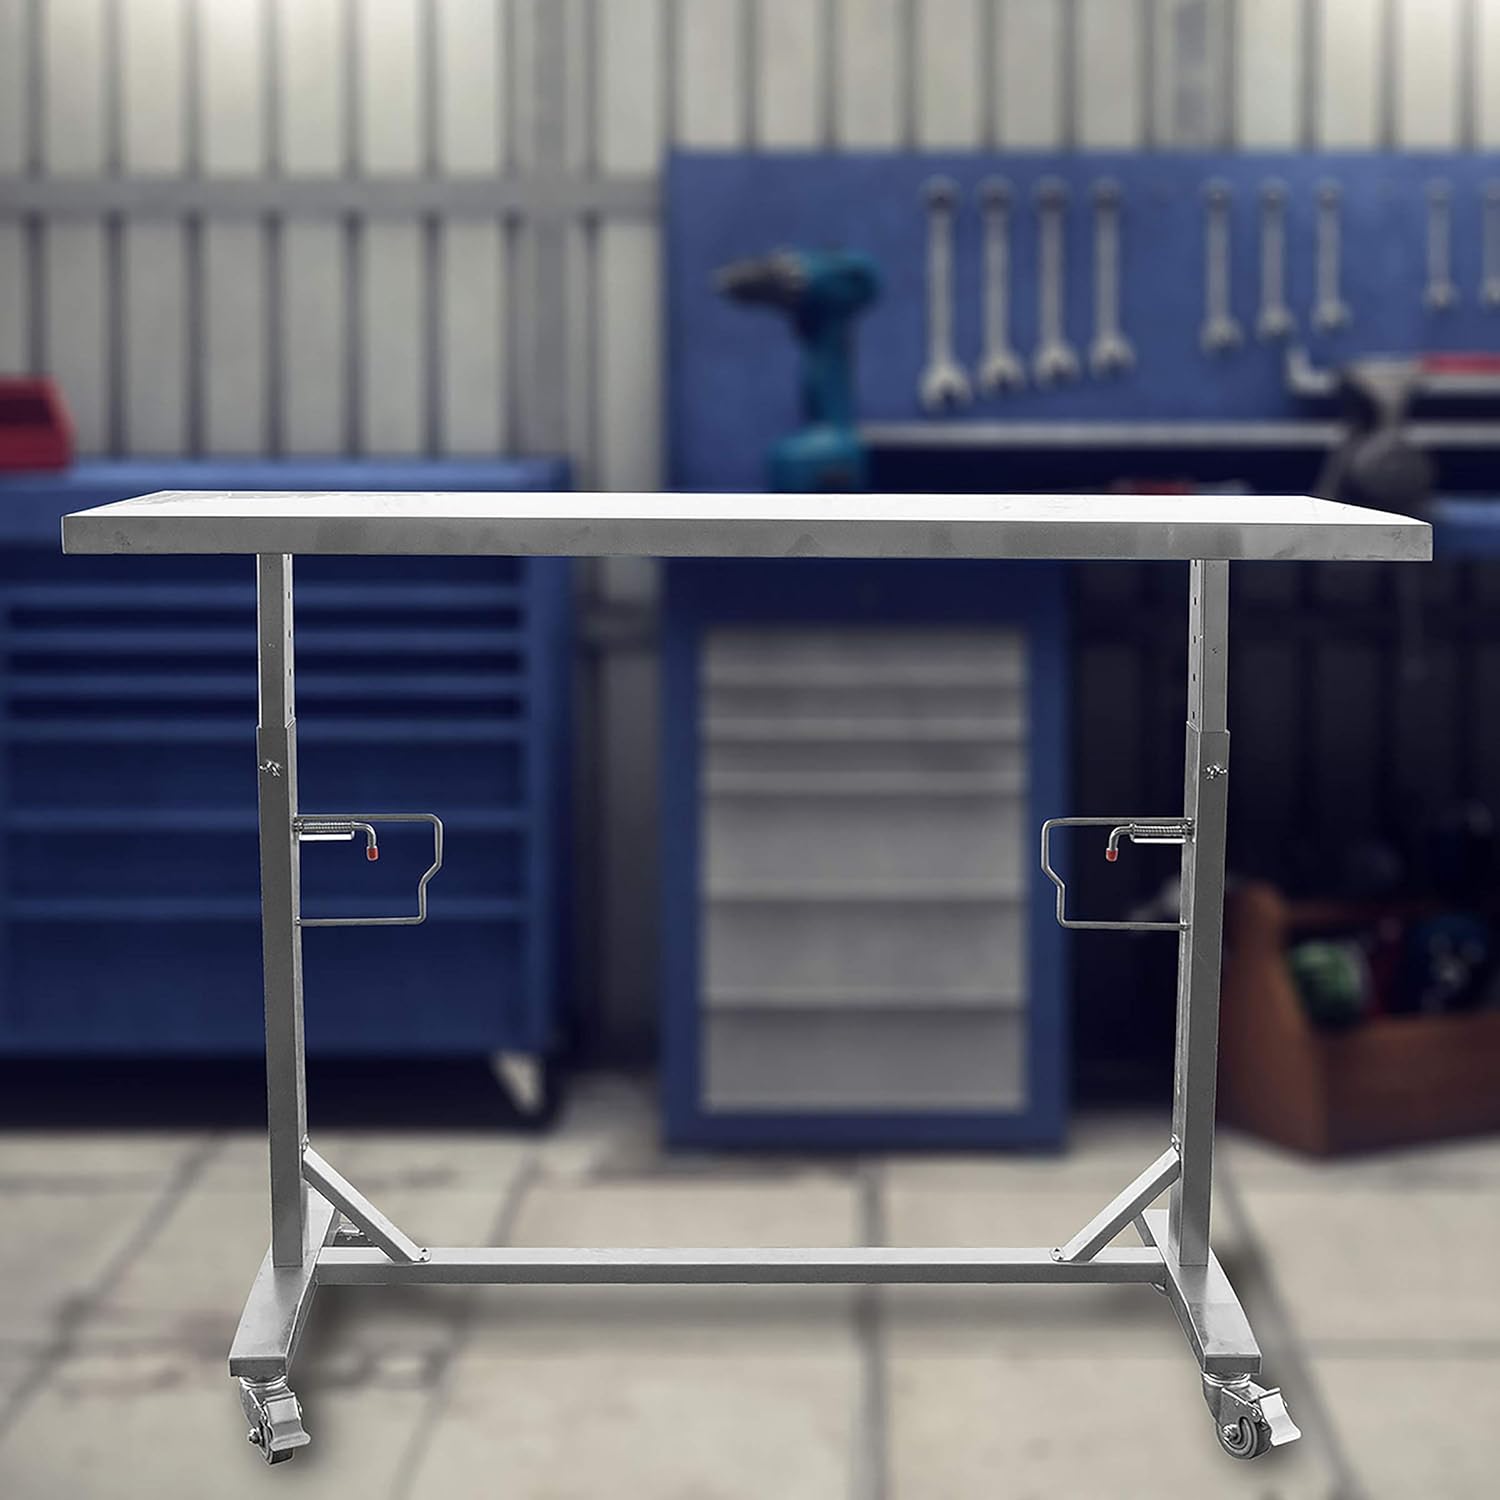 Sportsman Series Stainless Steel Adjustable Height Work Table With Rolling Locking Casters